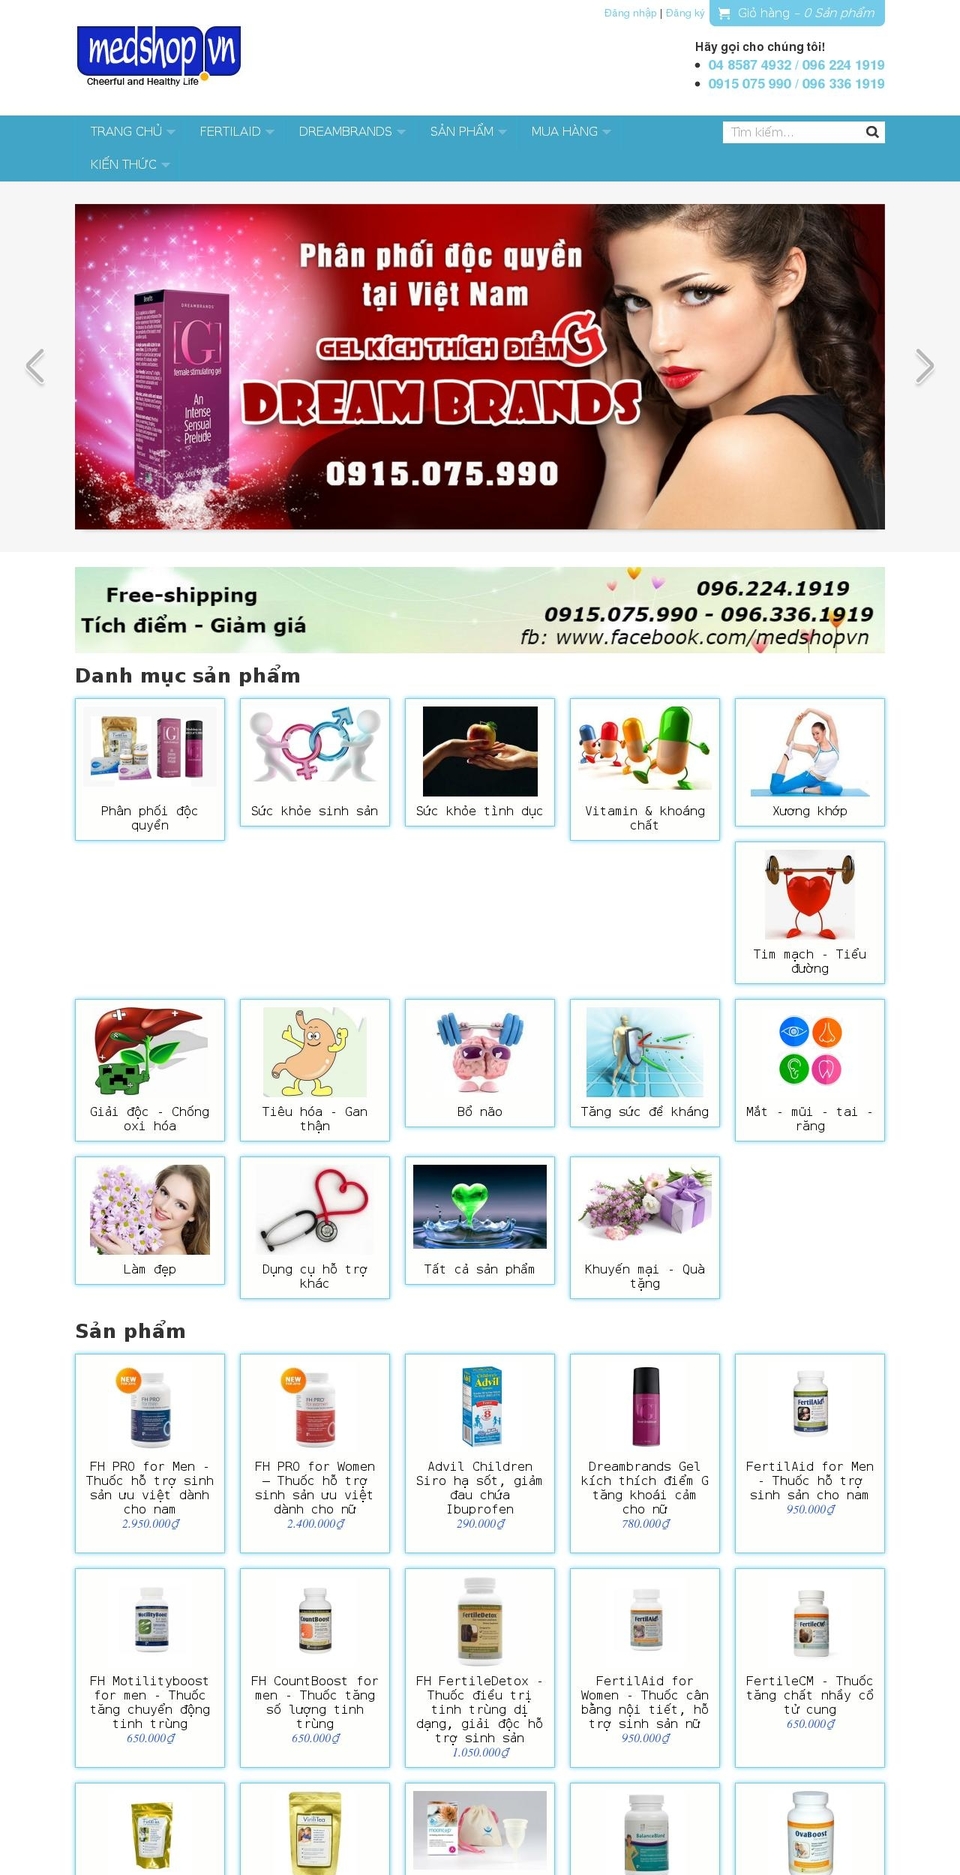 organic Shopify theme site example medshop.vn